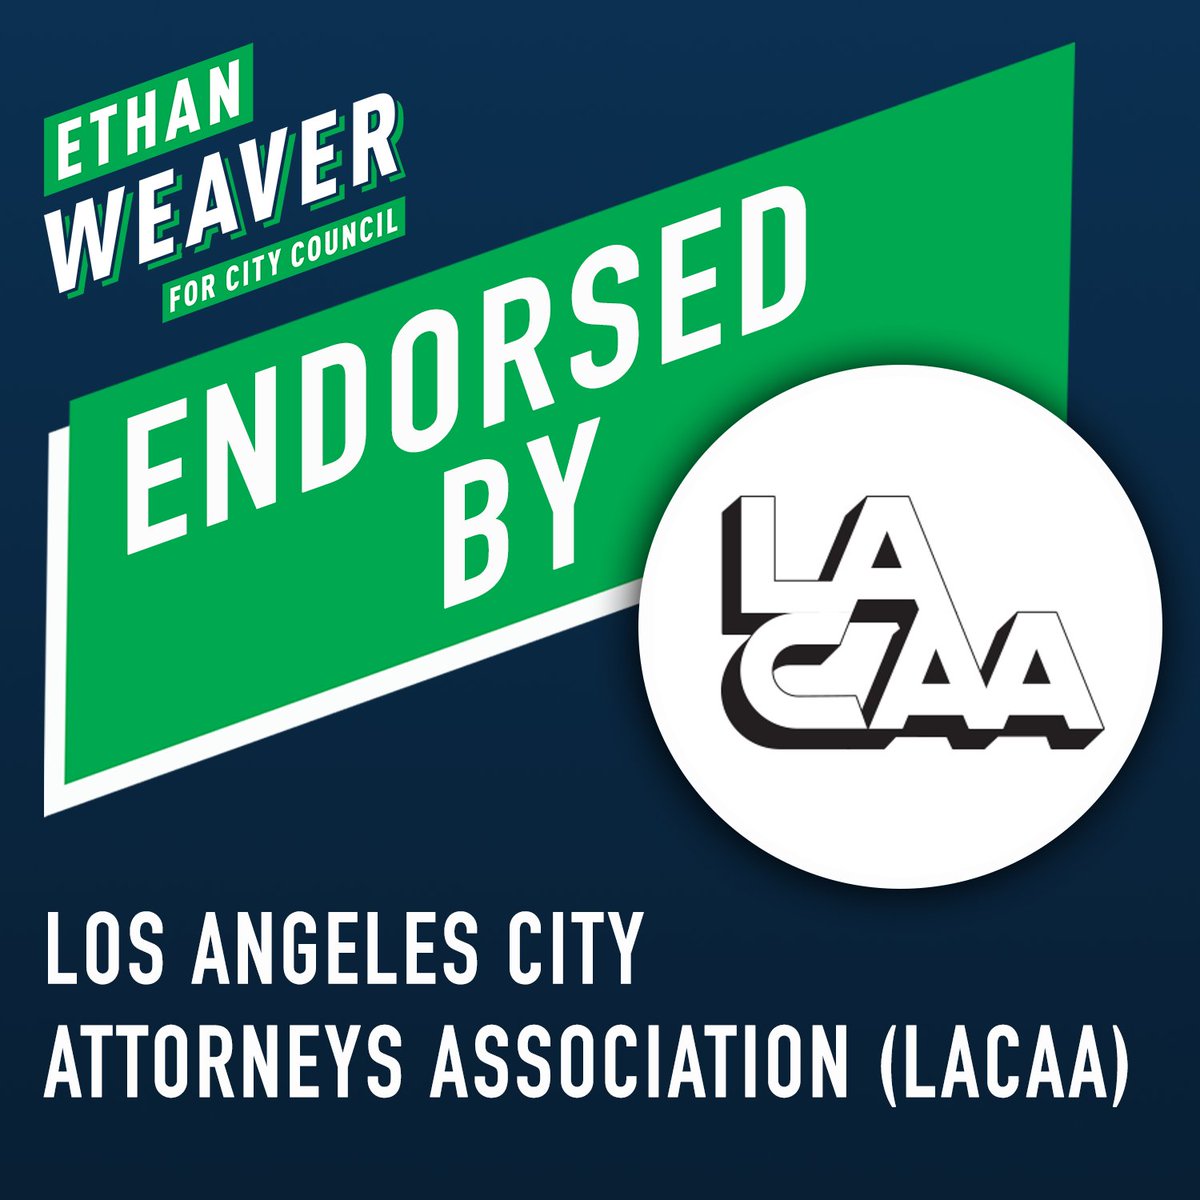 I’m so proud to have the support of my own union and of the men and women I work with every day to keep this City safe. I've learned so much about the needs of our community through my work as a Neighborhood Prosecutor, and I'll carry that experience with me on City Council.